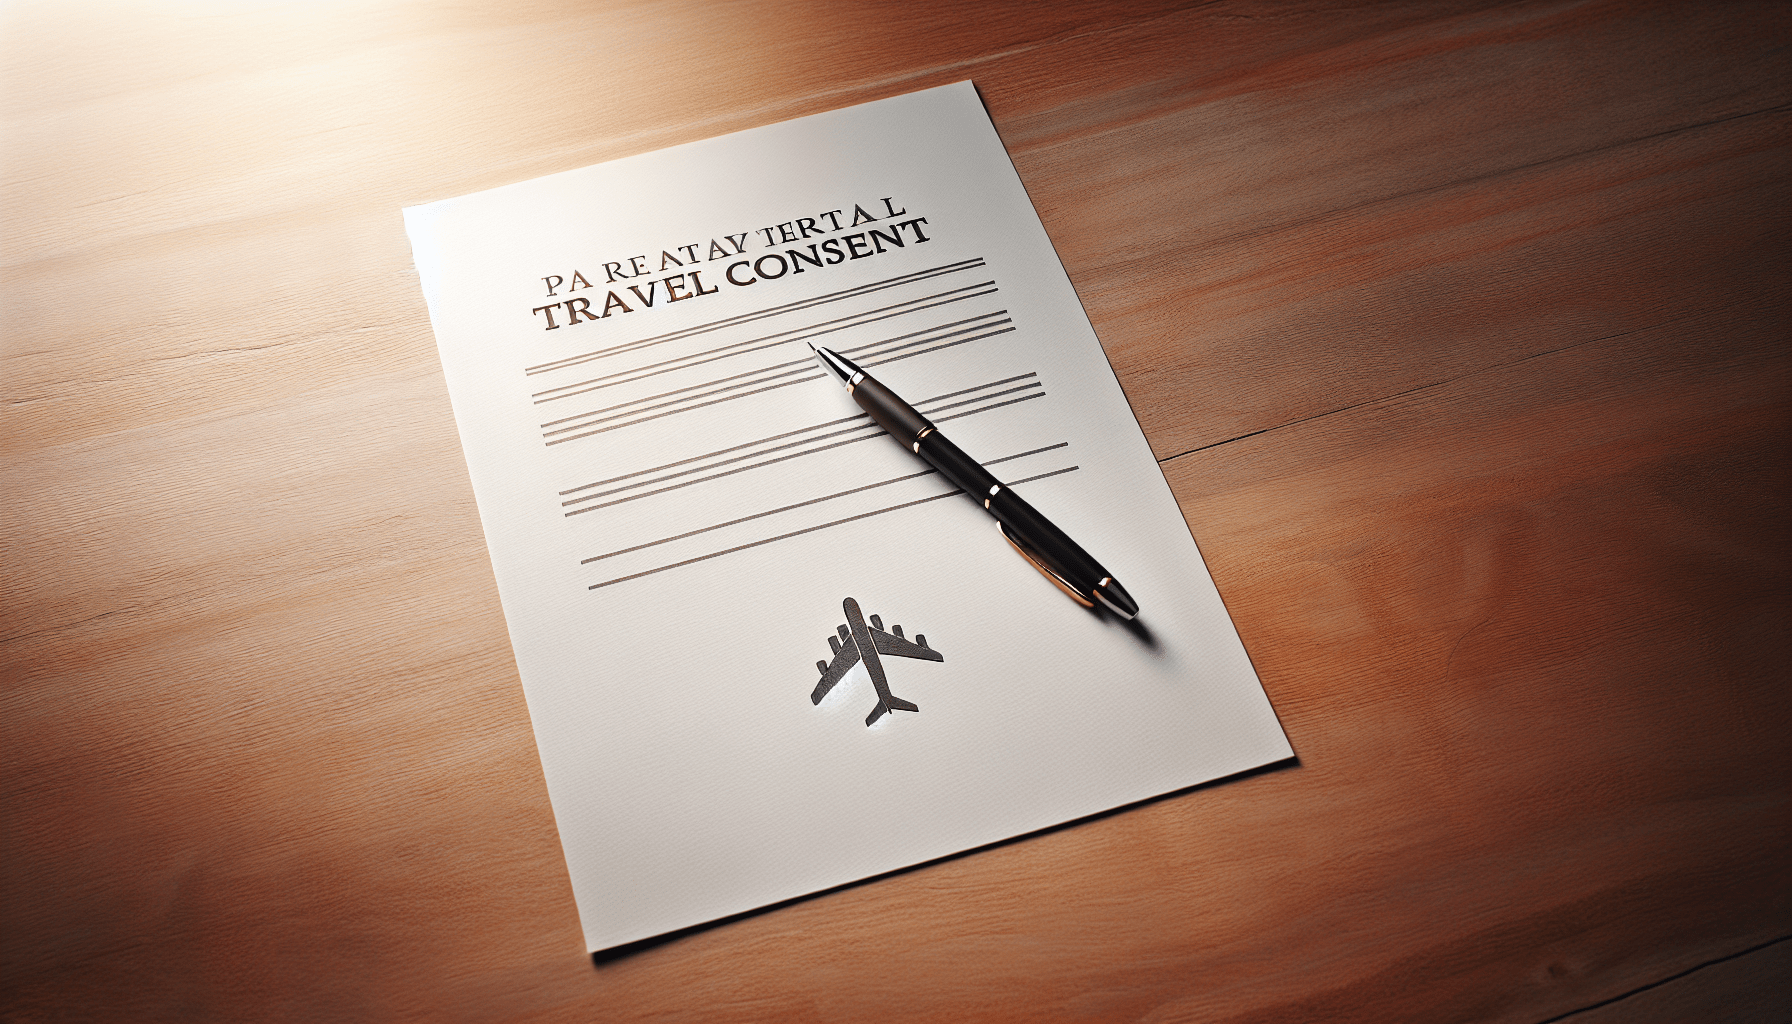 How Do I Write A Parent Consent Letter For Travel?